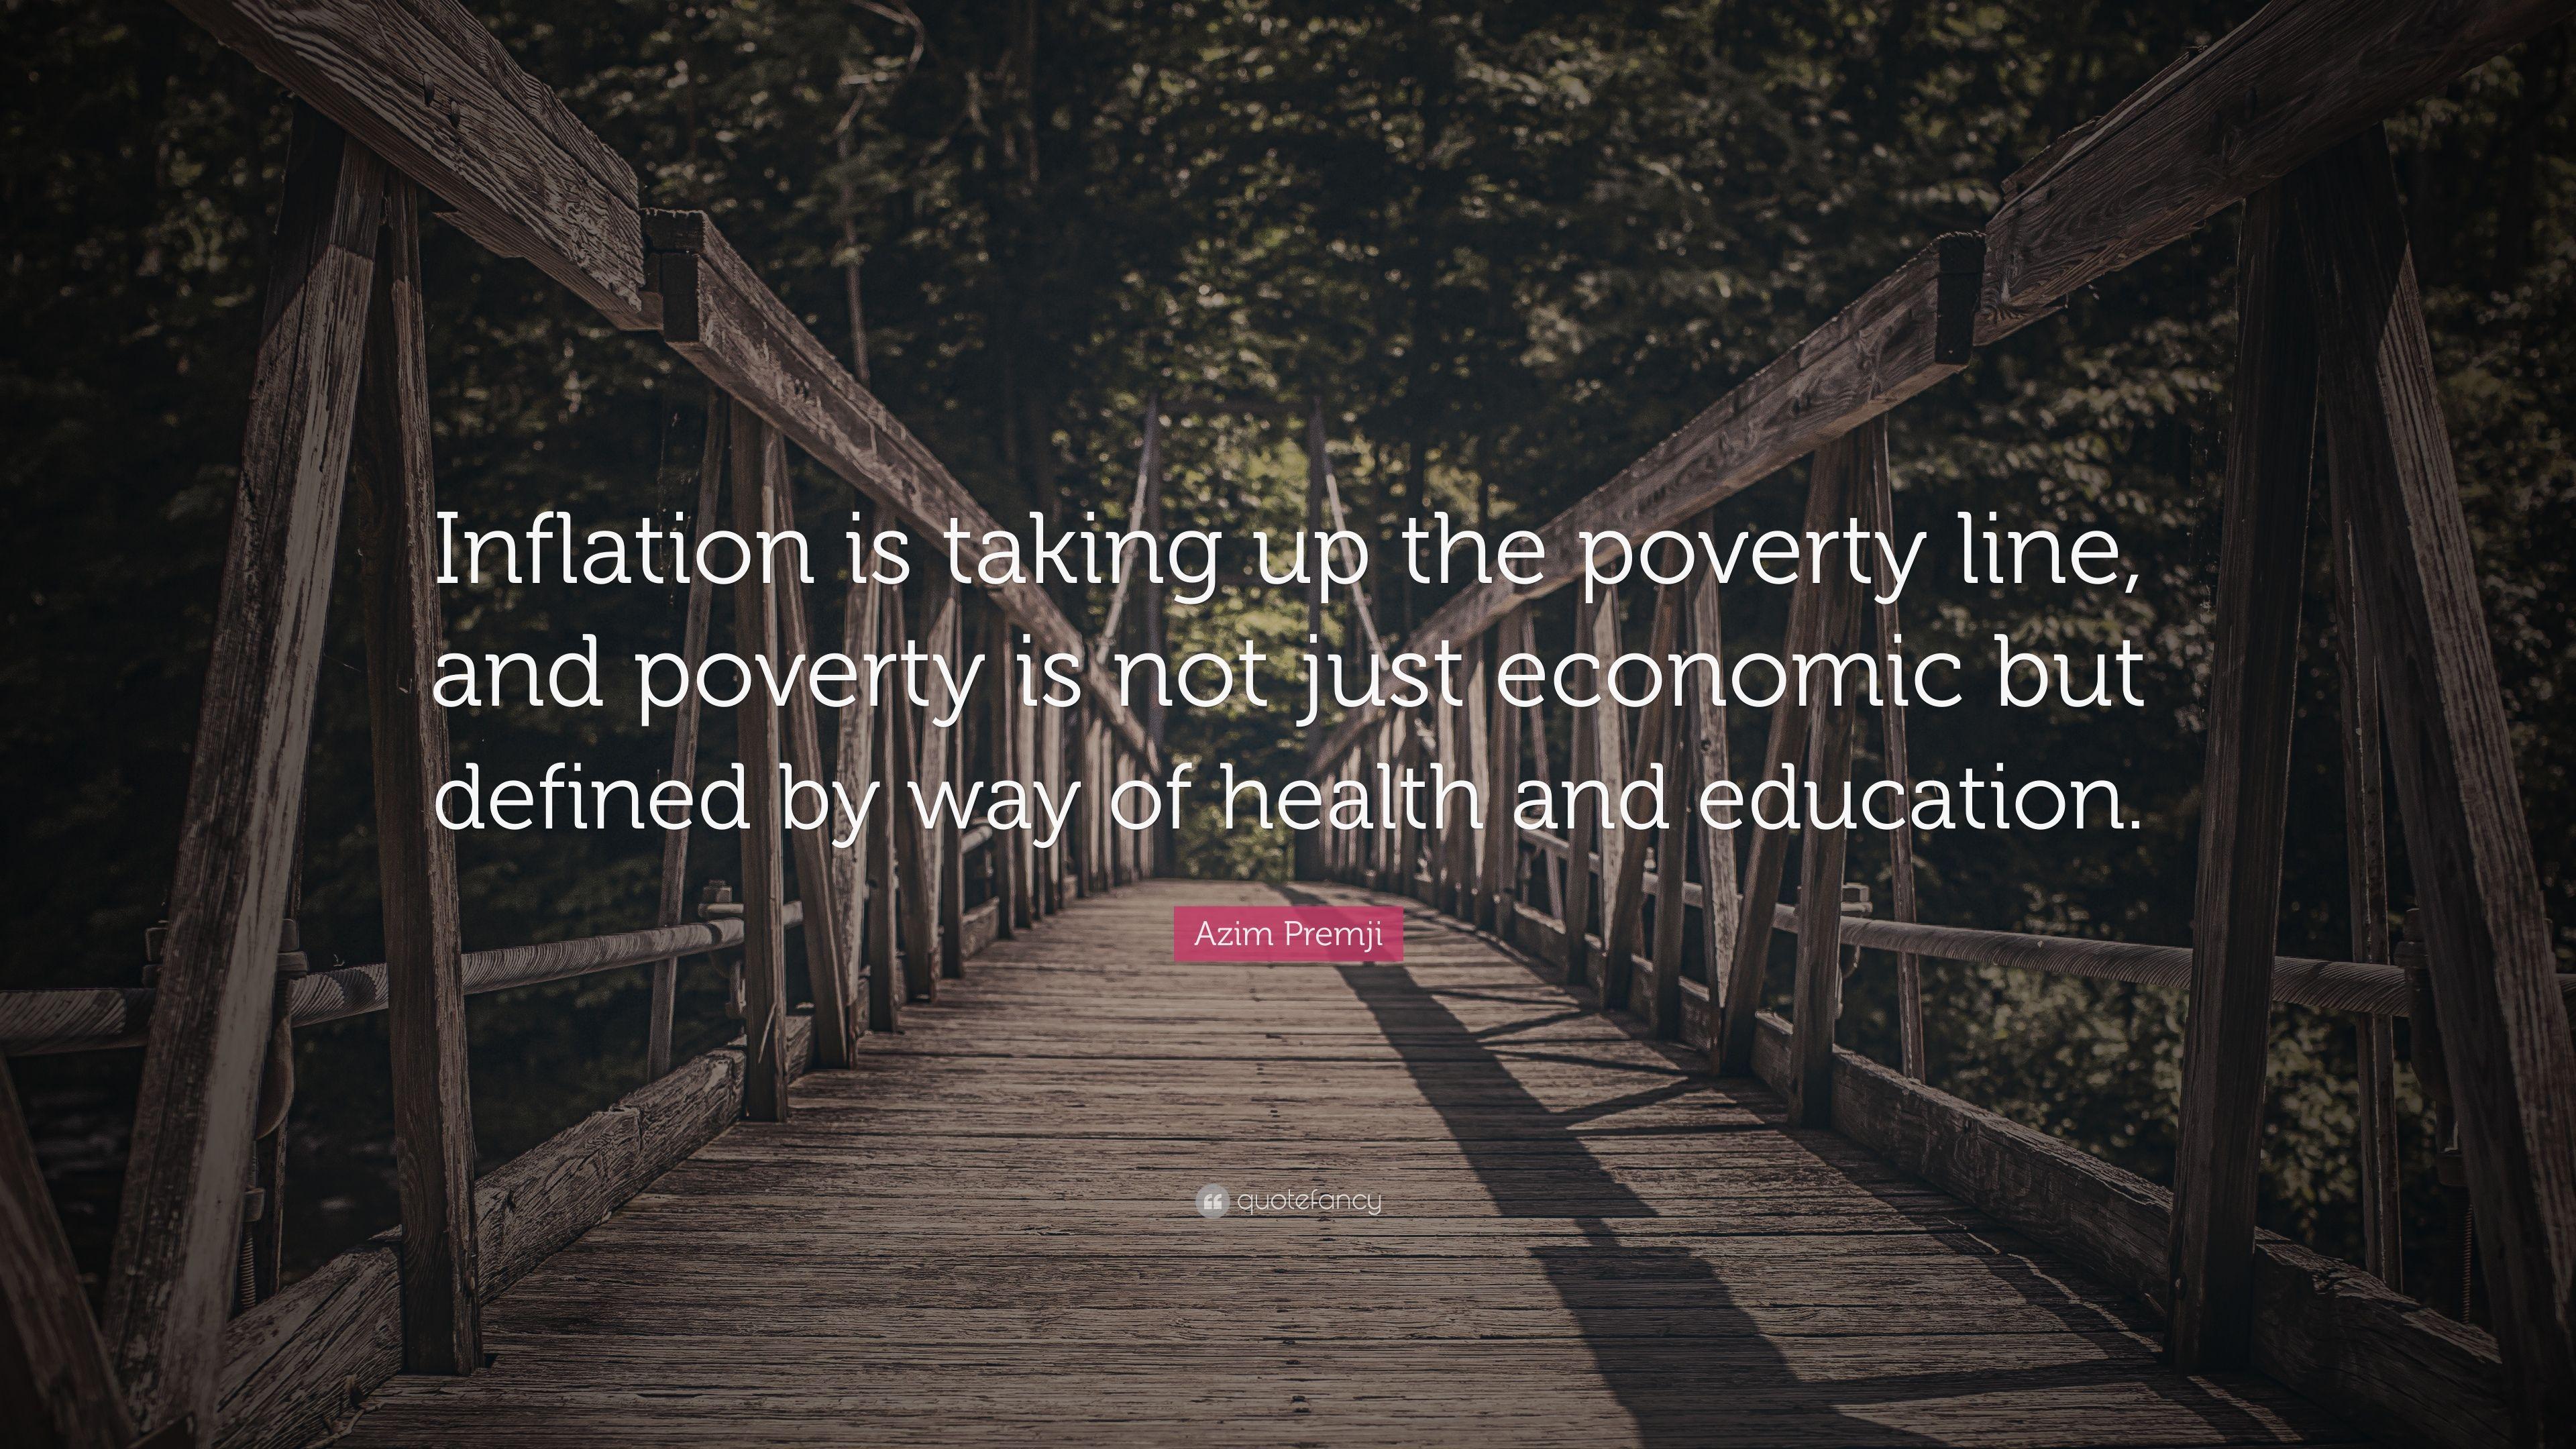 Azim Premji Quote: “Inflation is taking up the poverty line